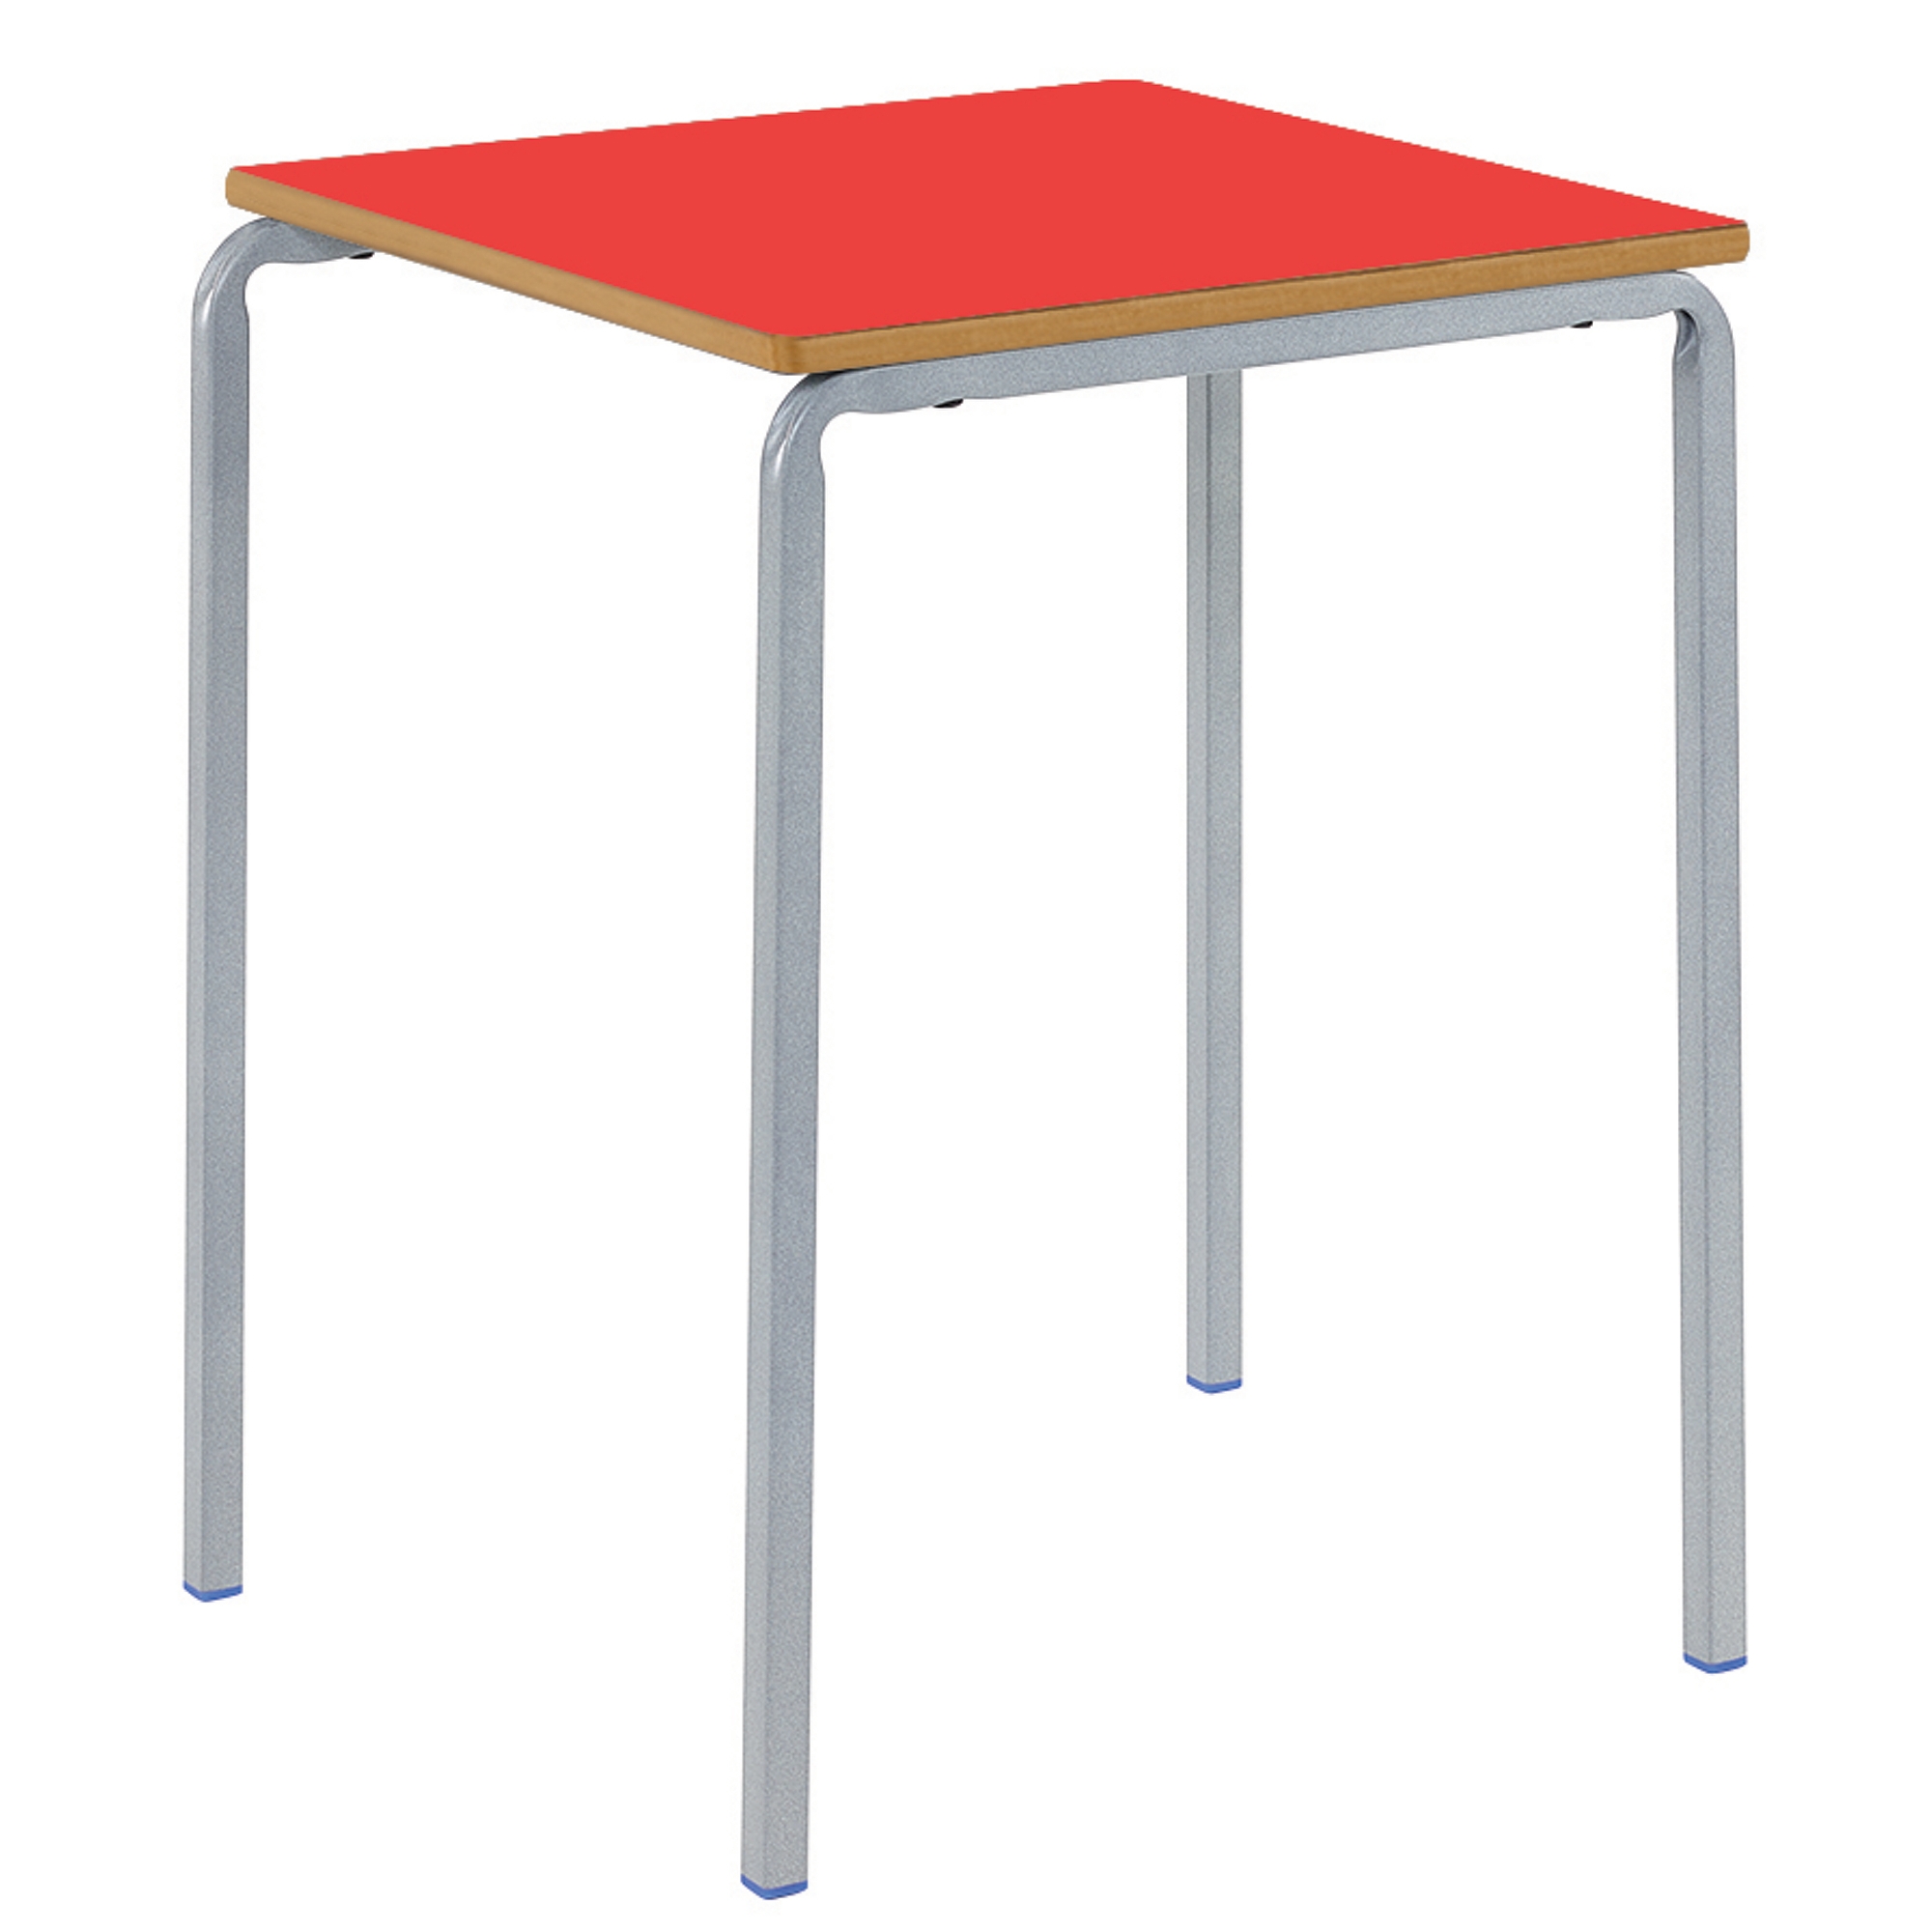 Classmates Square Crushed Bent Classroom Table - 600 x 600 x 460mm - Red